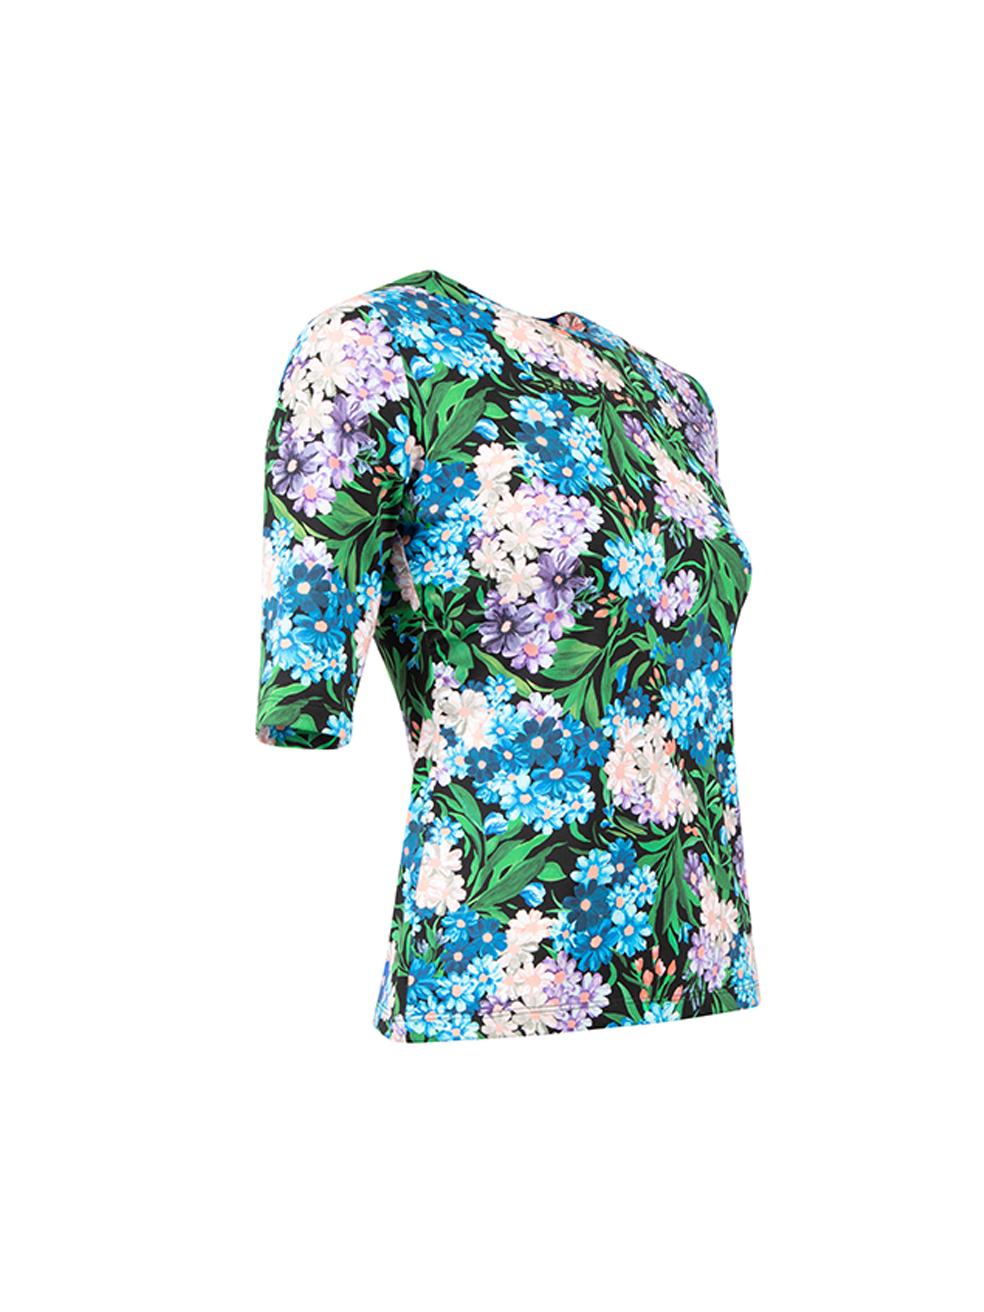 CONDITION is Very good. Minimal wear to top is evident. Minimal wear and some stains to the neckline on this used Balenciaga designer resale item. 



Details


Blue

Synthetic

Mid sleeves top

Floral pattern

Round neckline





Made in